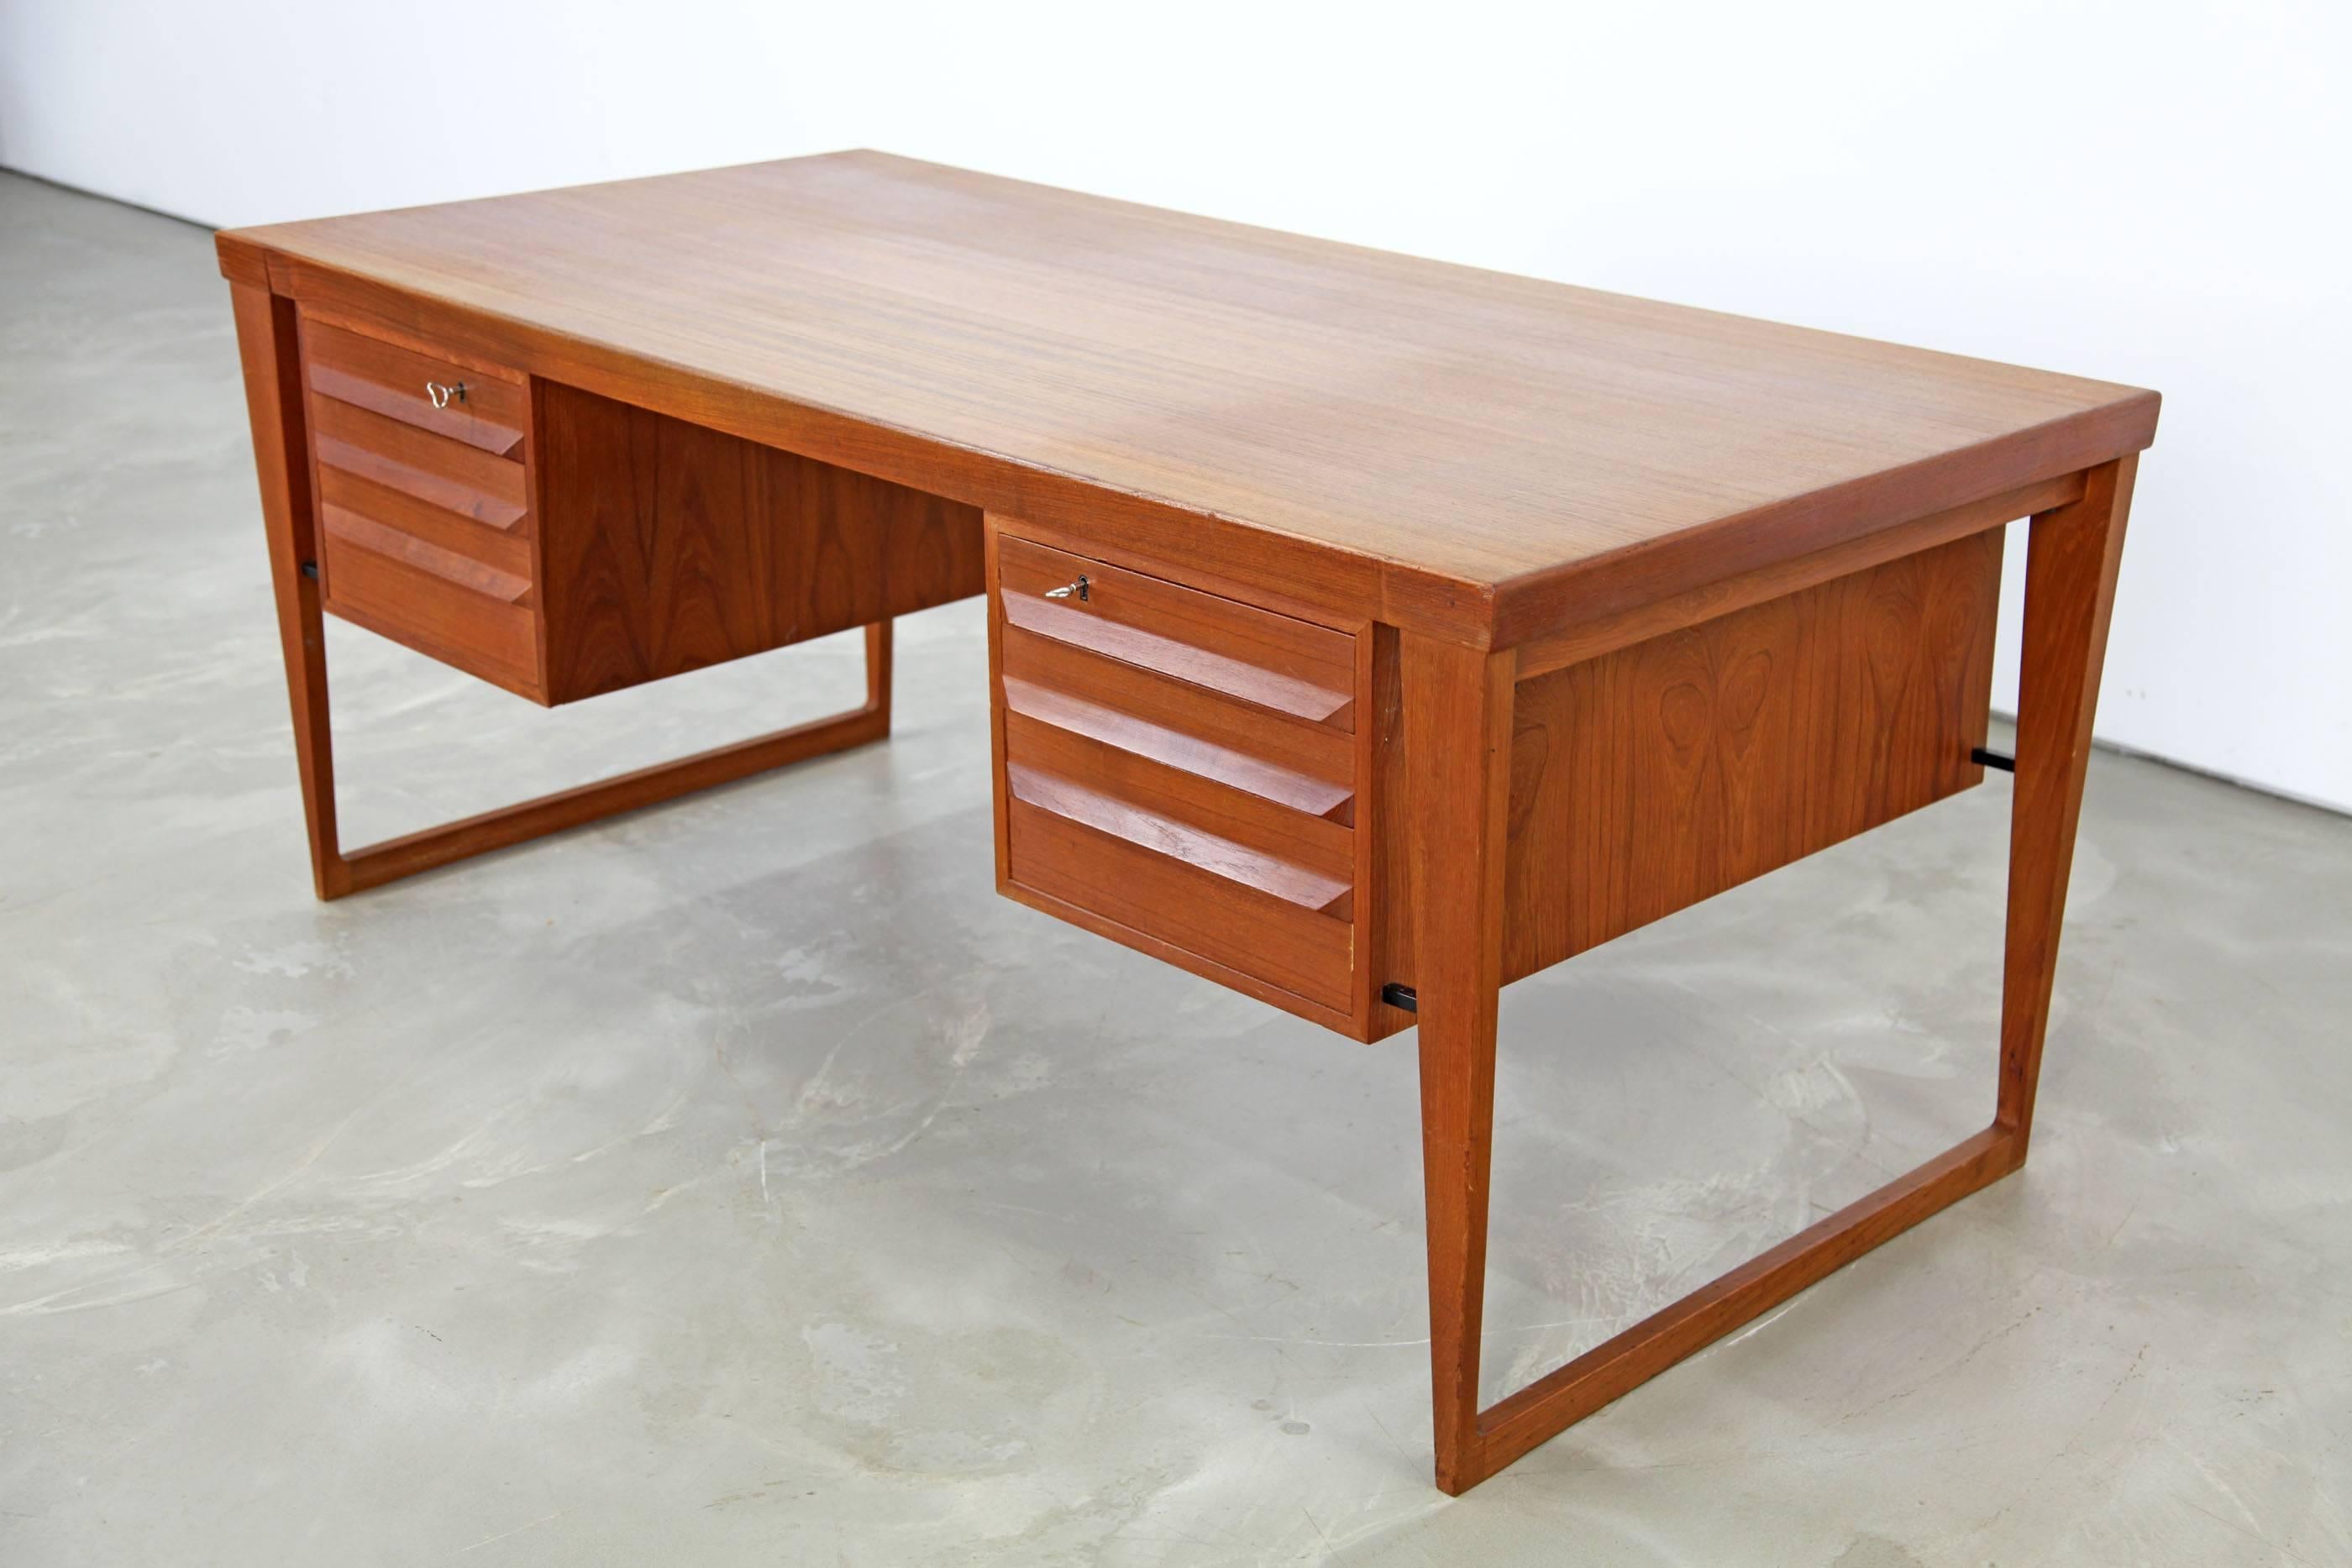 Beautiful teak executive desk designed by Kai Kristiansen. The desk features a stunning design, with sledge feet and additional compartments on the back. Original keys included.